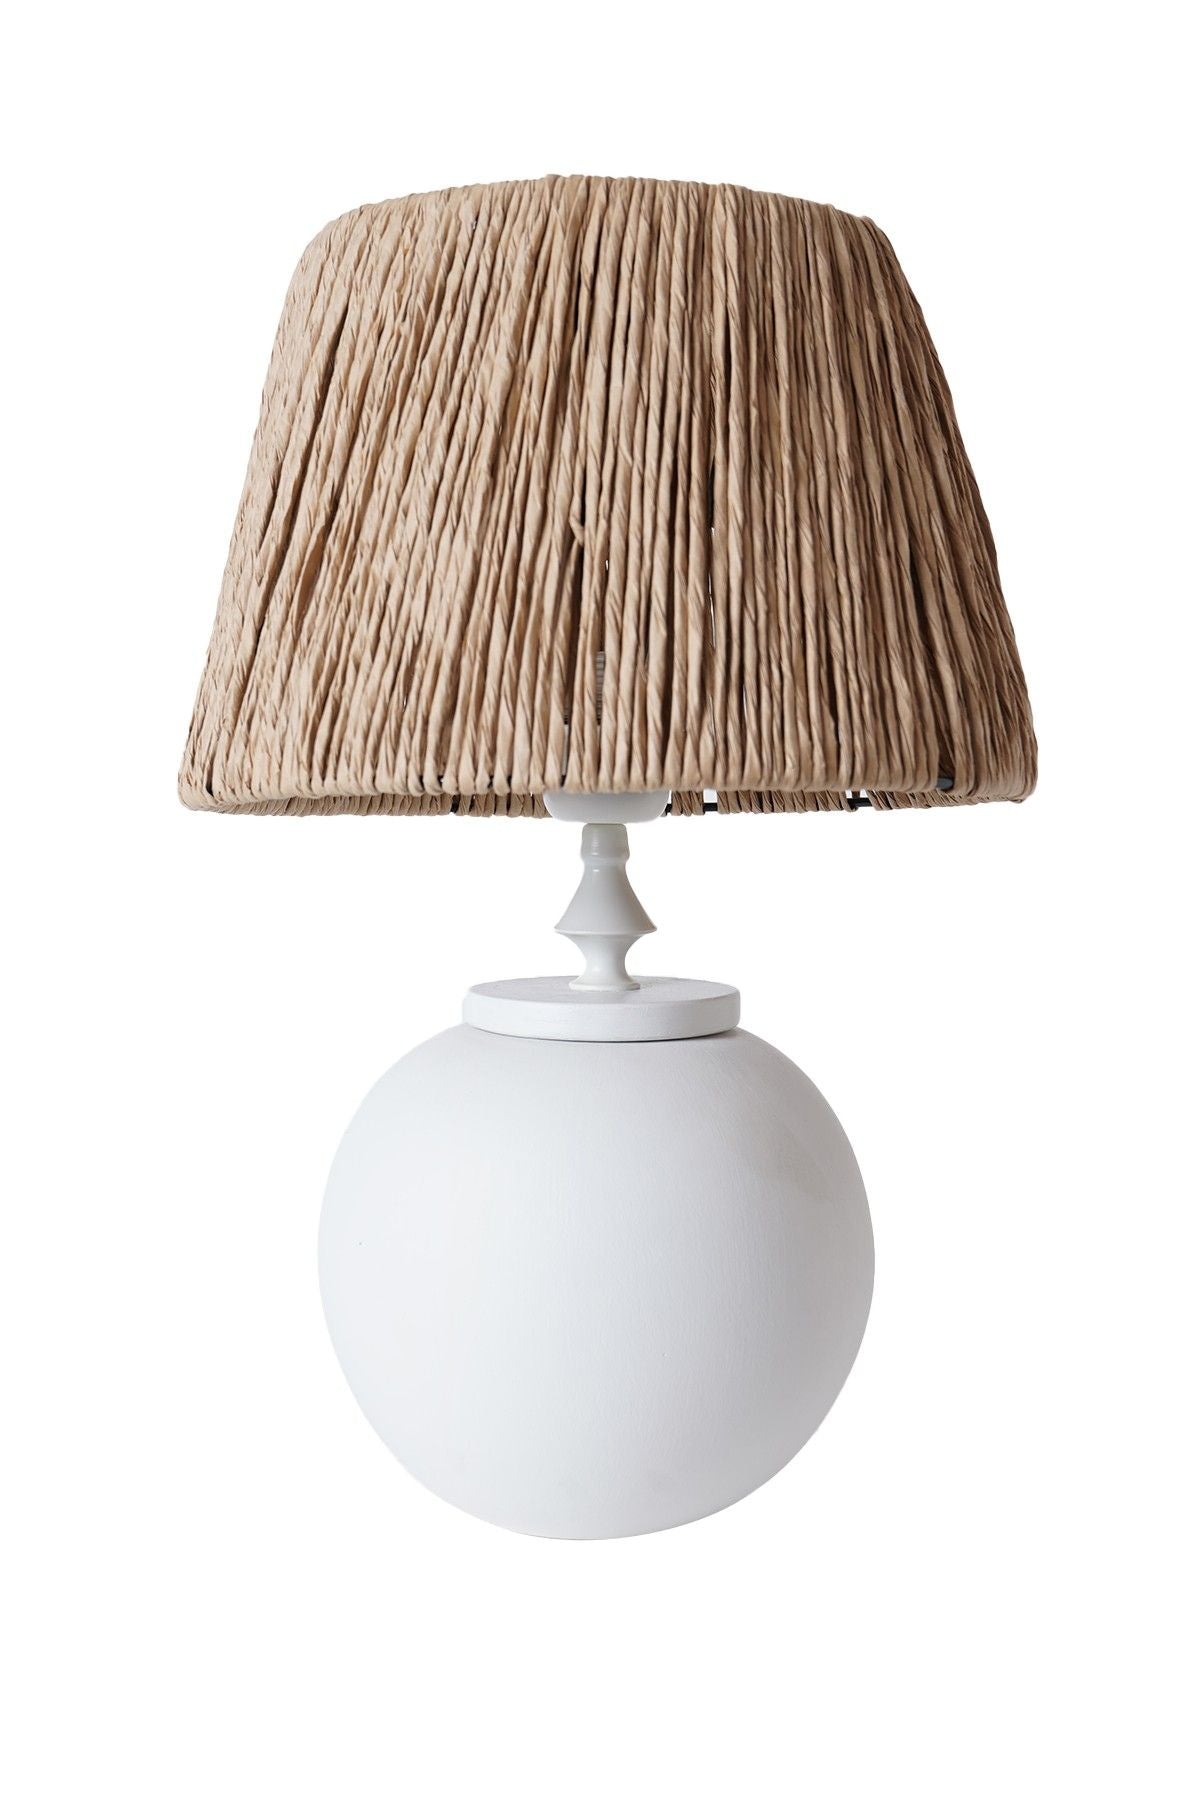 YL589 - Table Lamp